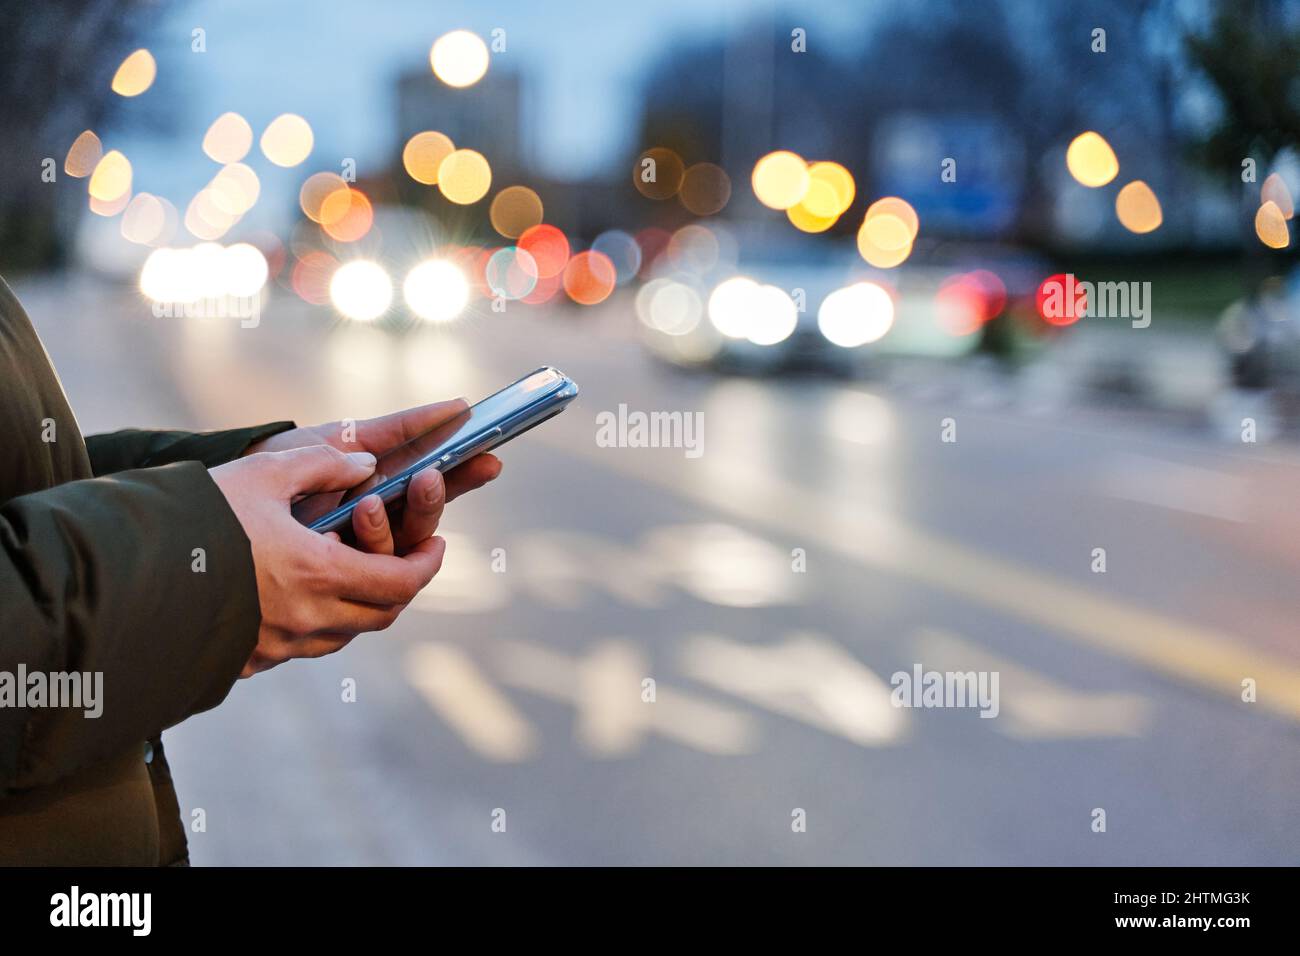 Close-up image of a woman's hands using smartphone at night on the city street, search or social networking concept, woman asking for transport via mo Stock Photo